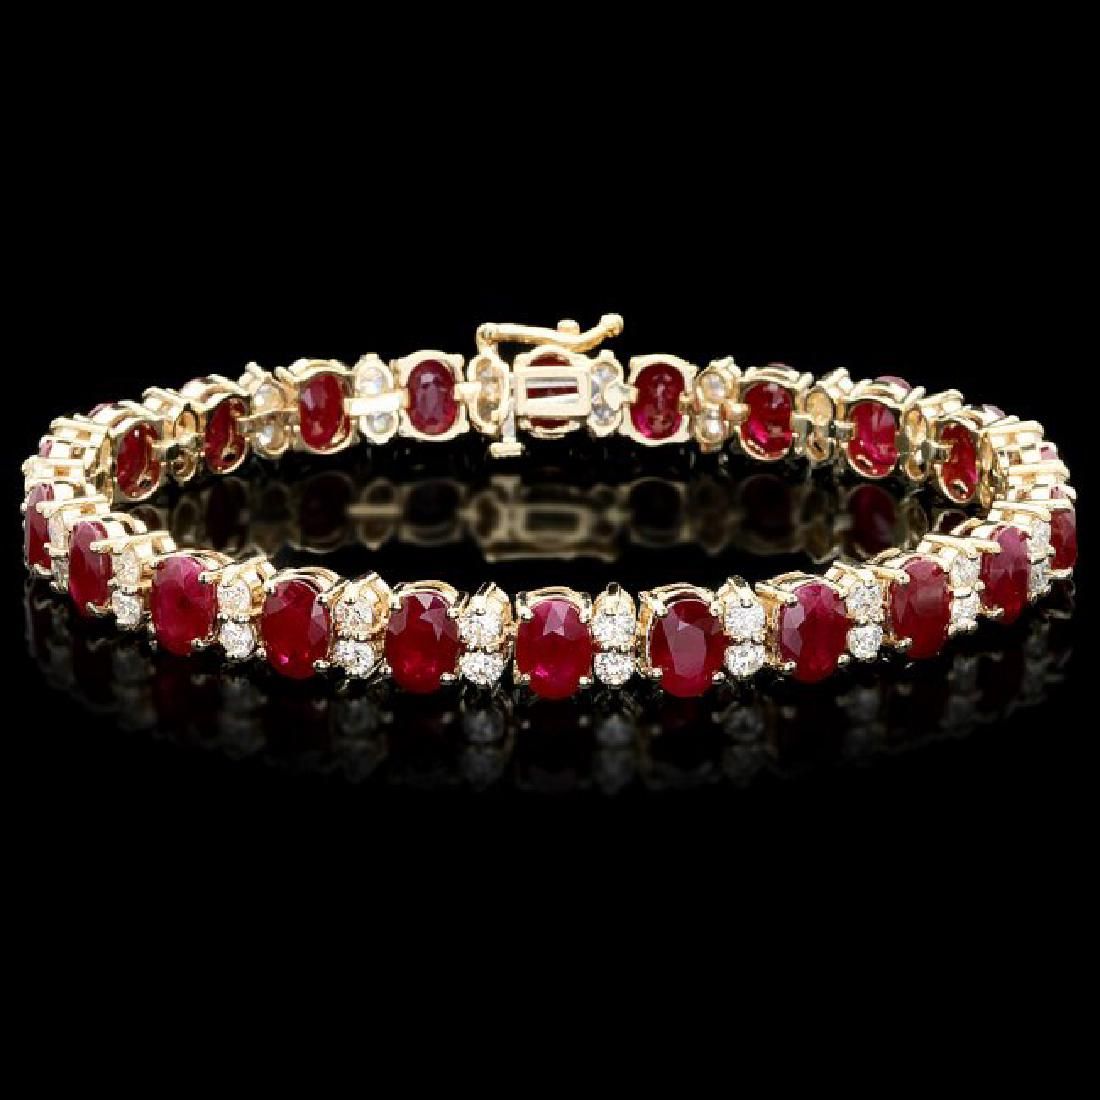 Radiant Accessories: Adding Sparkle with Ruby Bracelets